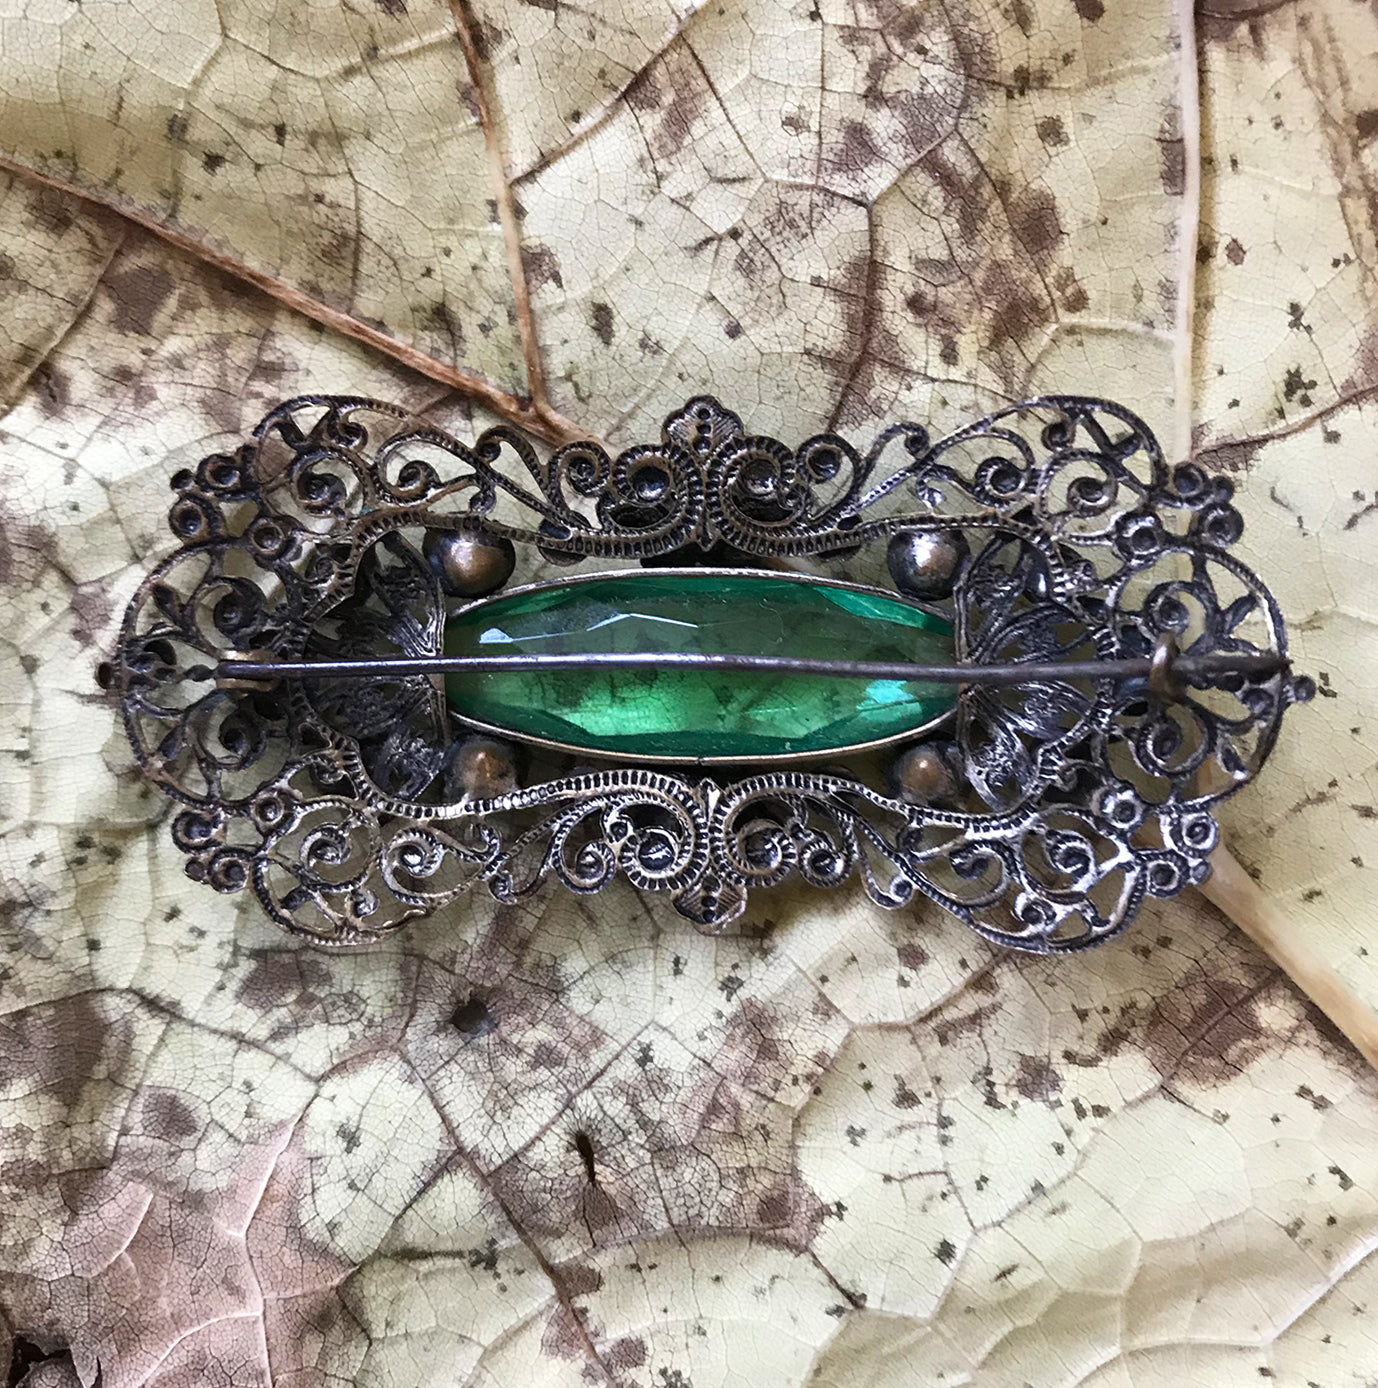 Excellent quality Edwardian Brooch with intricate design detail. Numerous faceted glass emeralds surrounding one larger green glass gem. - SHOP NOW -  www.intovintage.co.uk